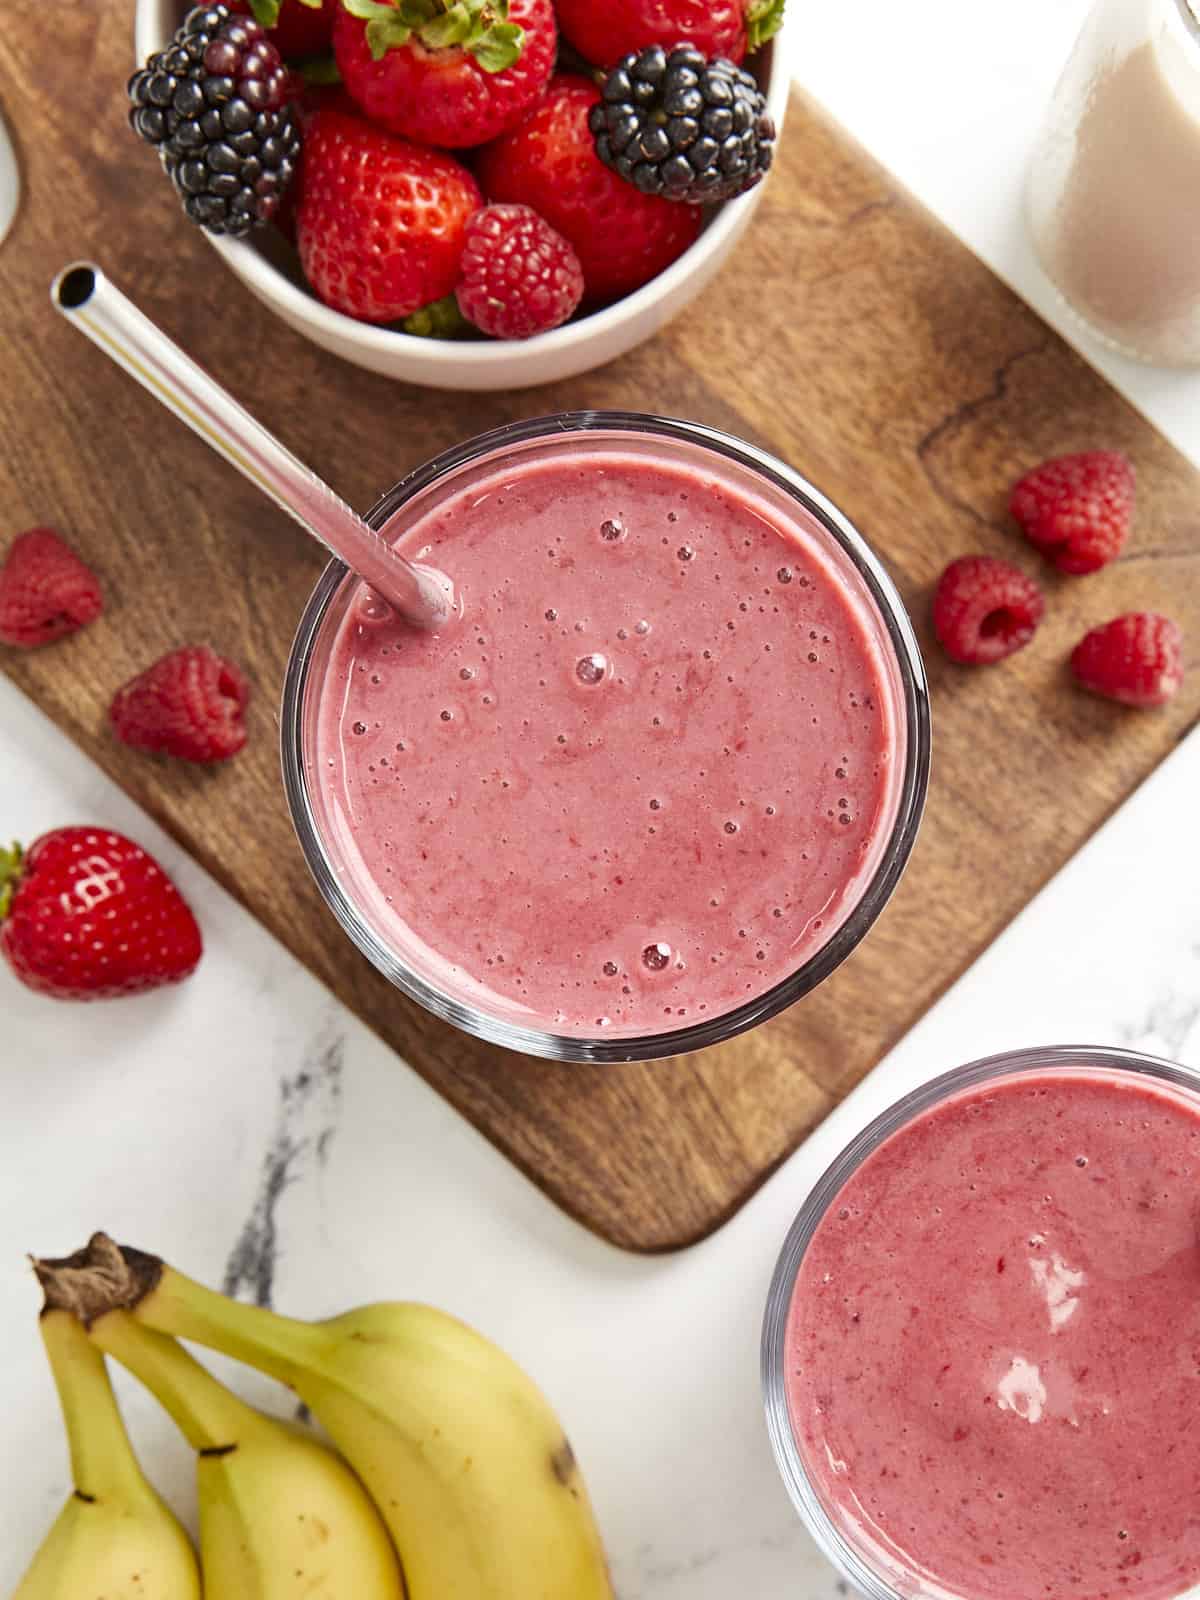 Mixed Berry Smoothie - Budget Bytes